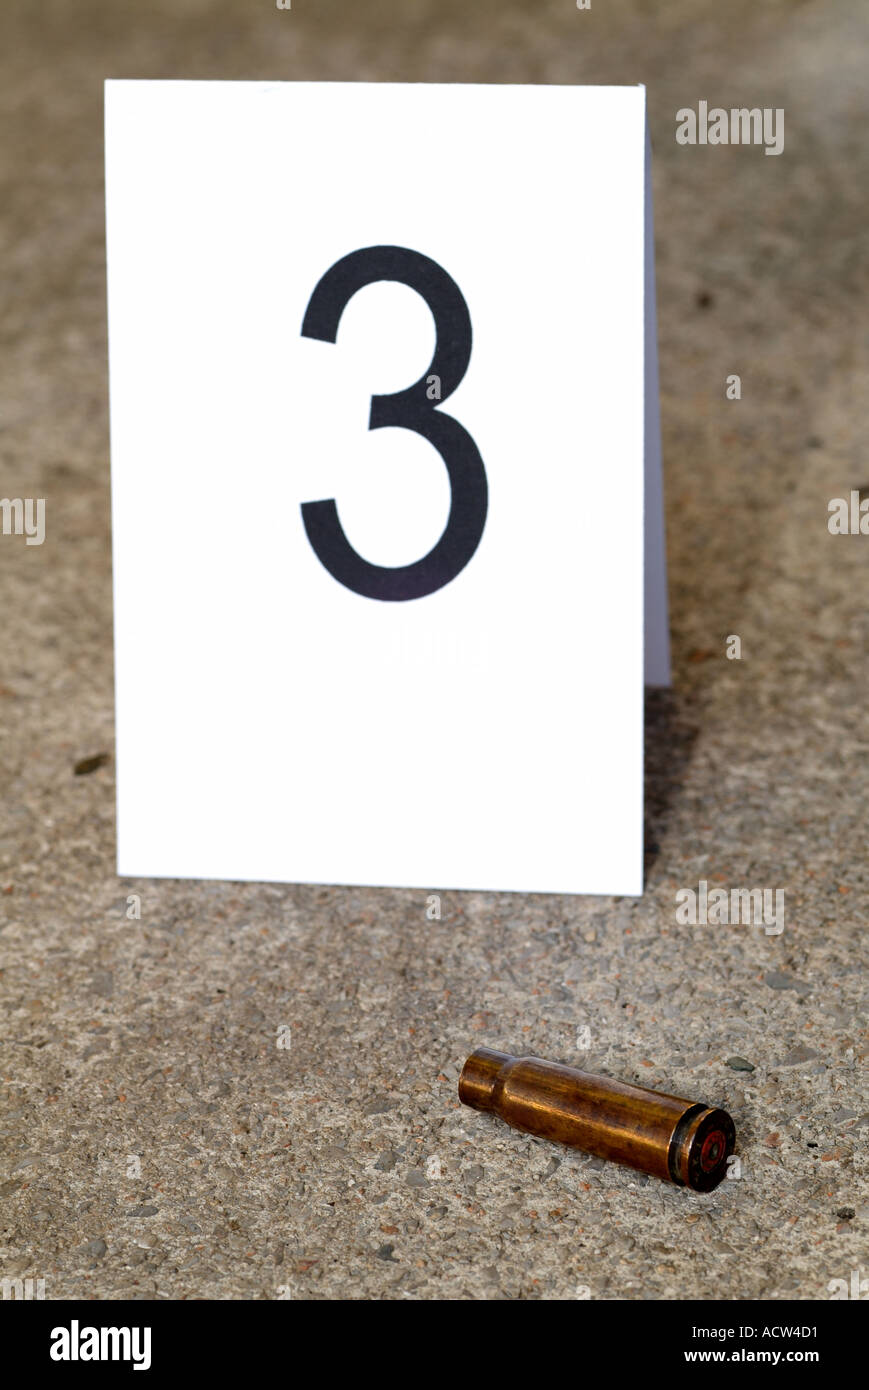 Empty Bullet Casing at a Crime Scene Marked by Forensics as Part of an Investigation Into a Violent Shooting Stock Photo